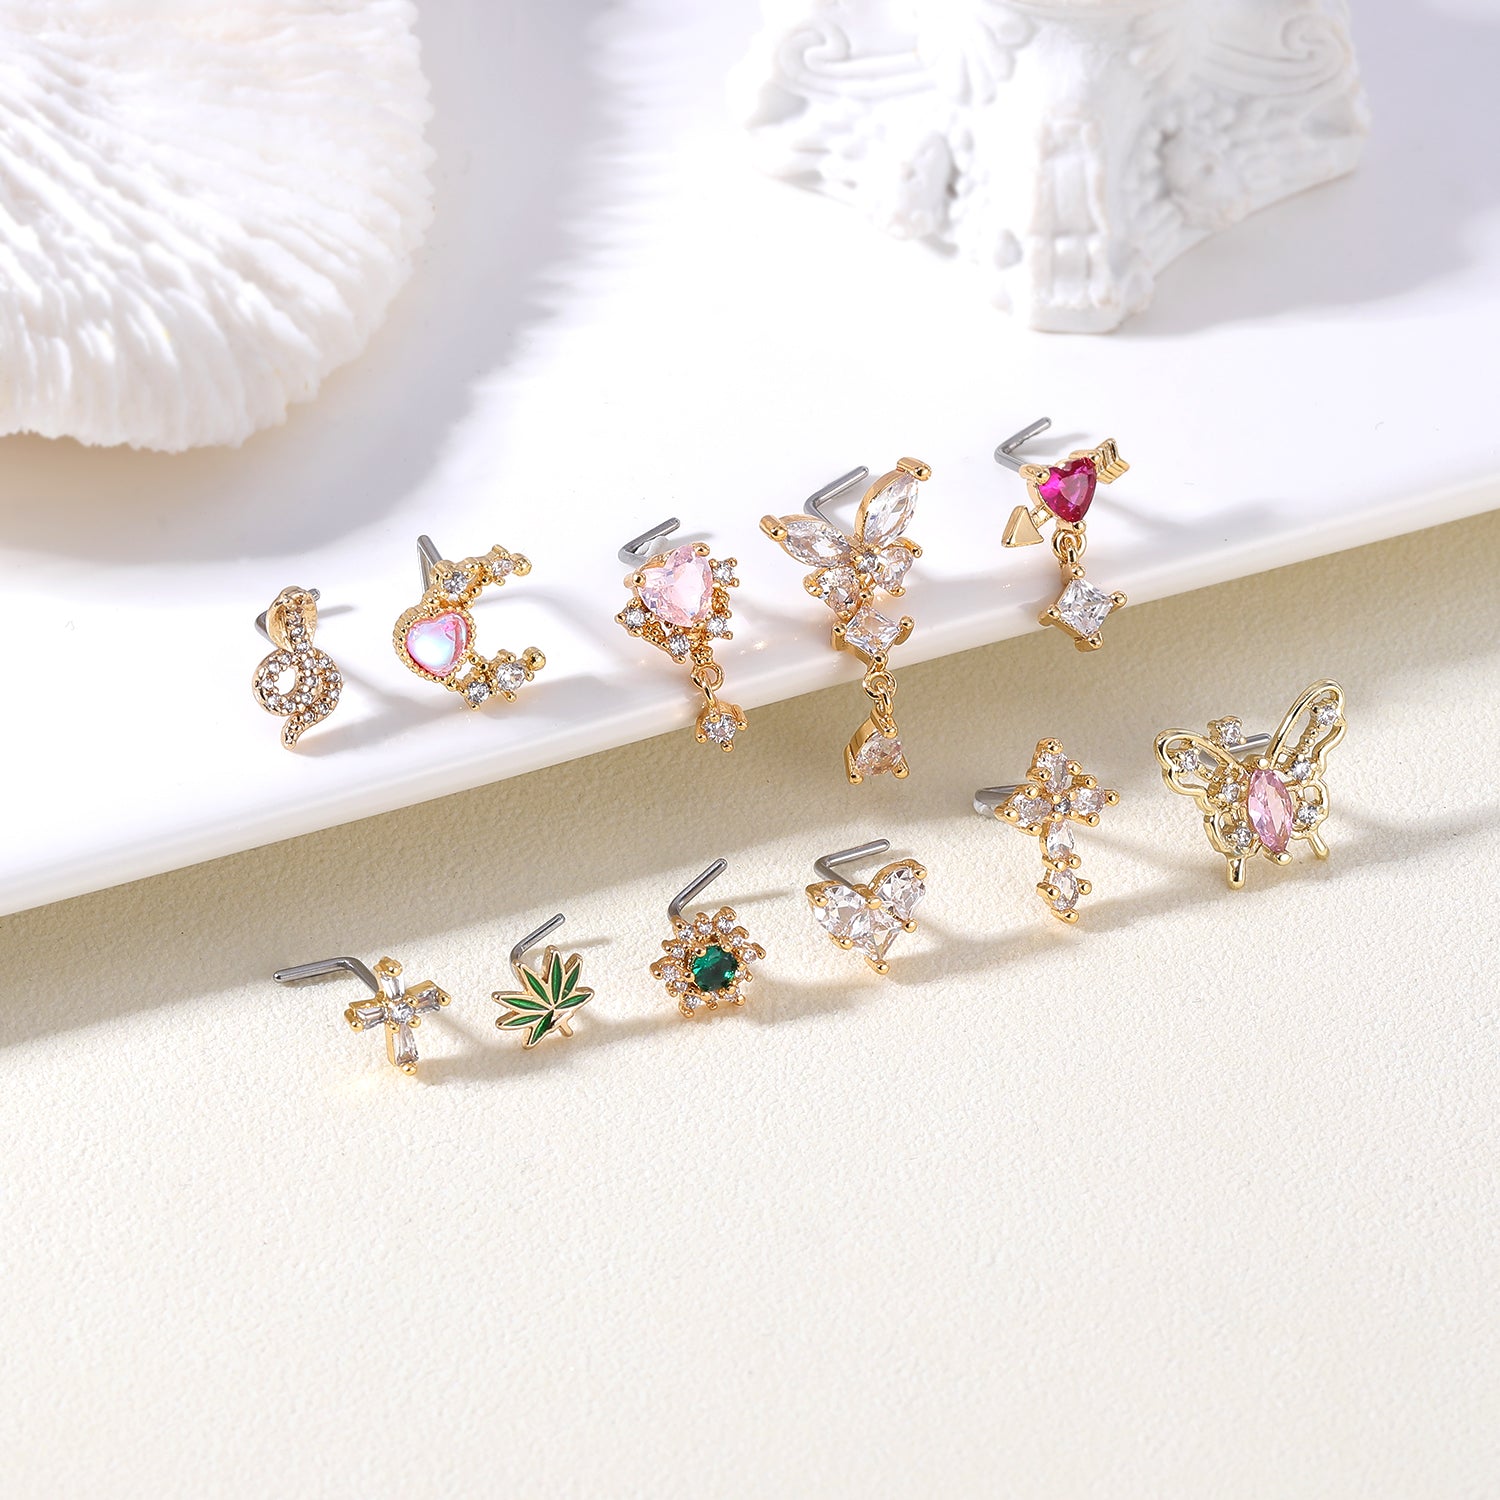 20G-Green-Leafy-Nose-Studs-Piercing-L-Shape-Nose-Rings-Gold-Silver-Plated-Nostril-Piercing